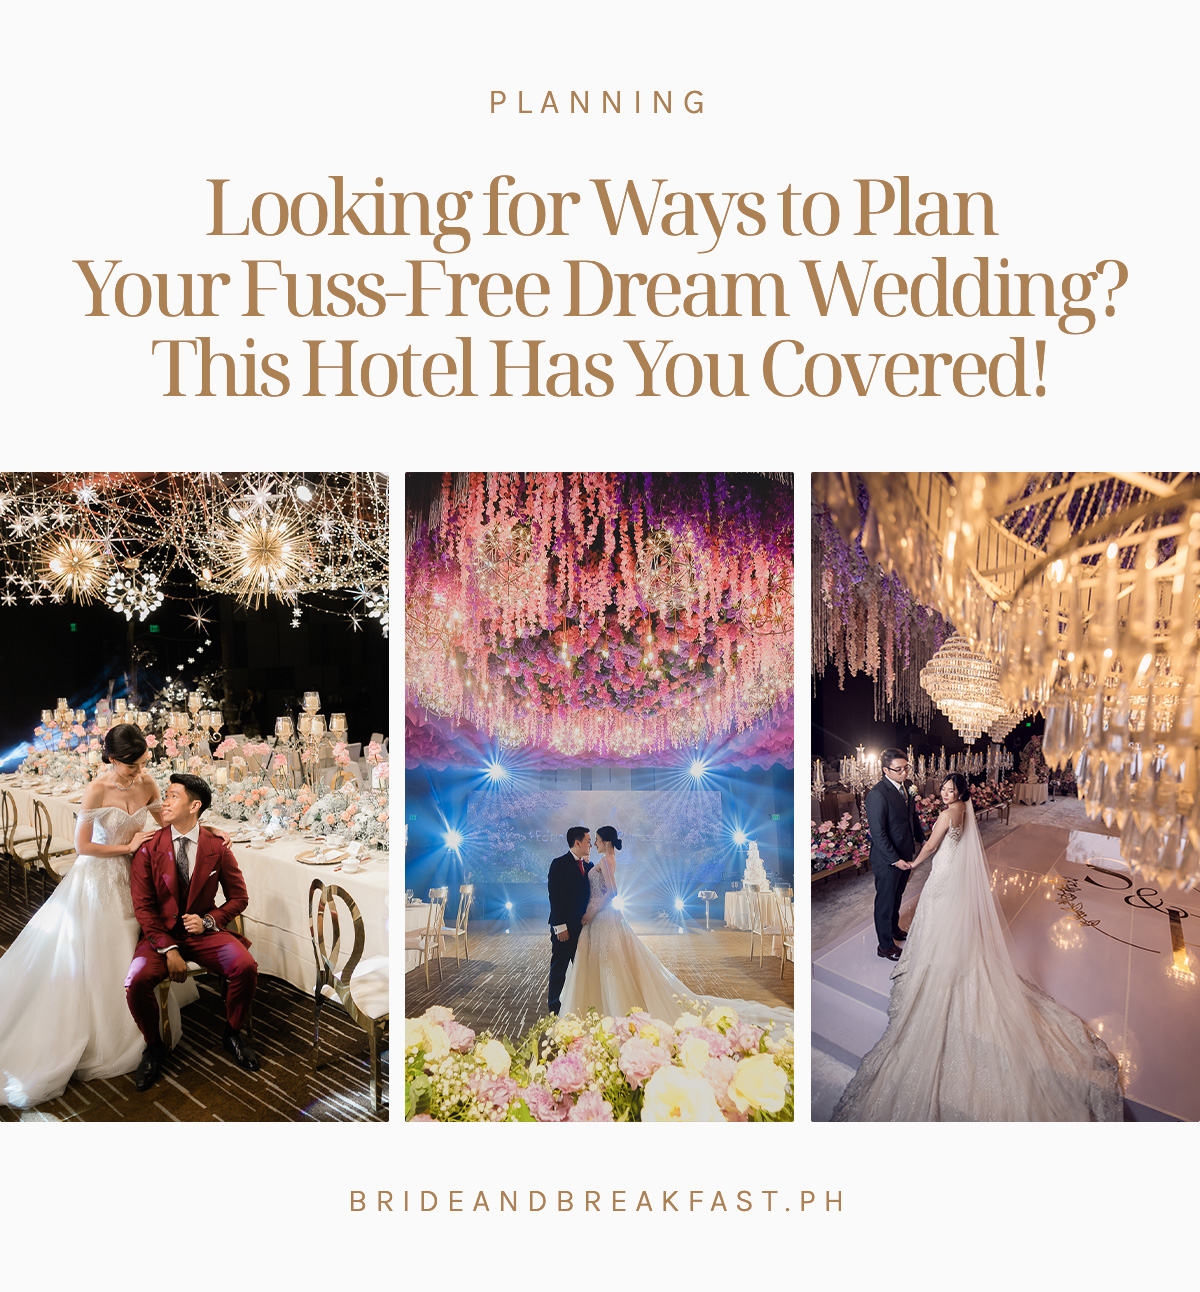 Looking for Ways to Plan Your Fuss-Free Dream Wedding? This Hotel Has You Covered